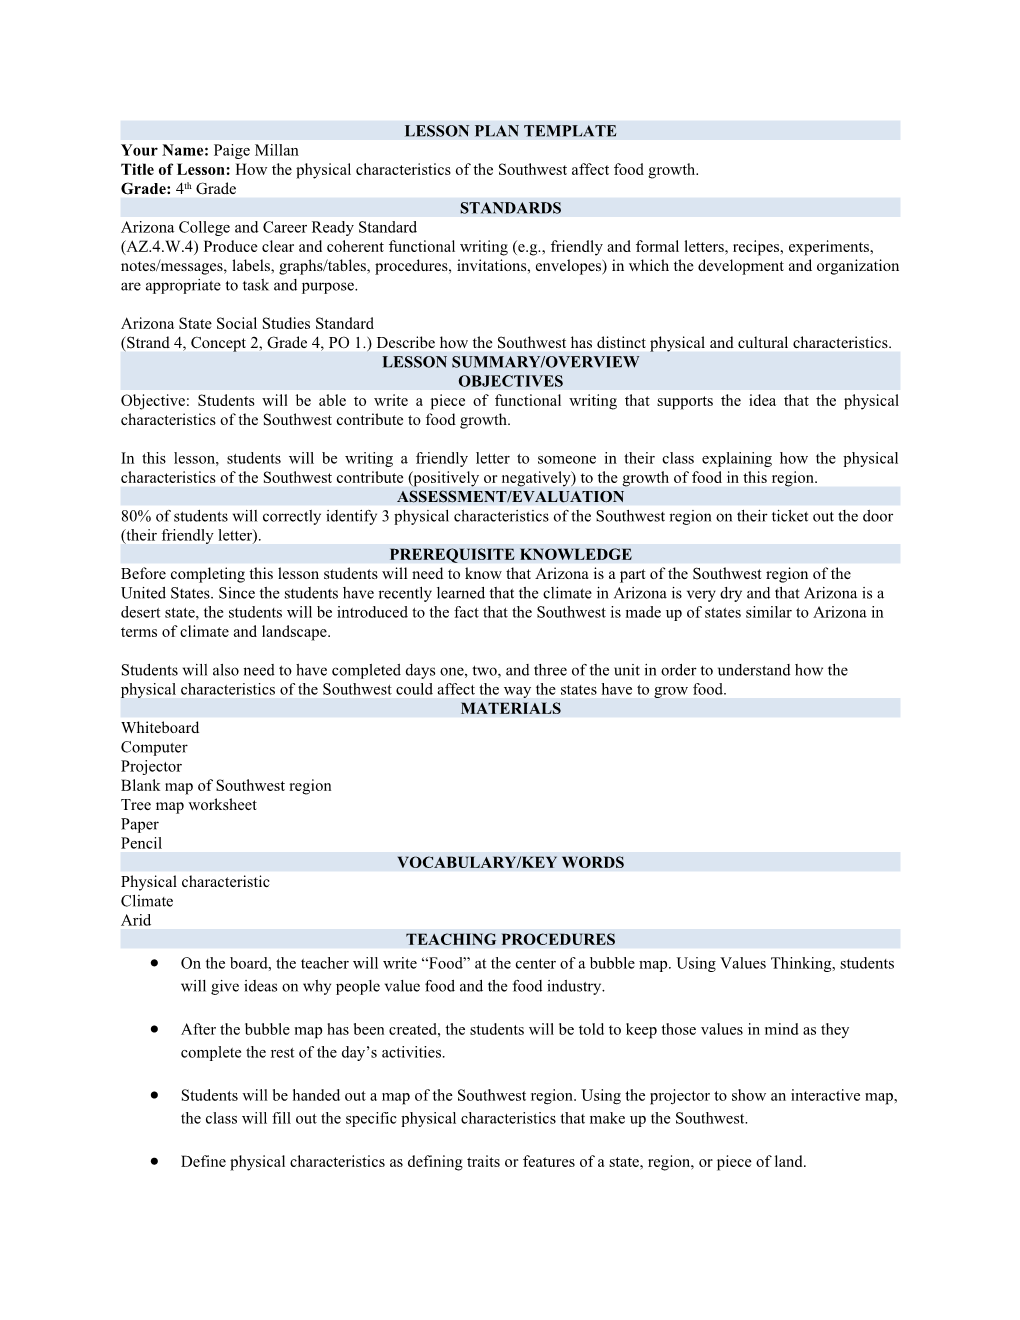 Lesson Plan Template s1